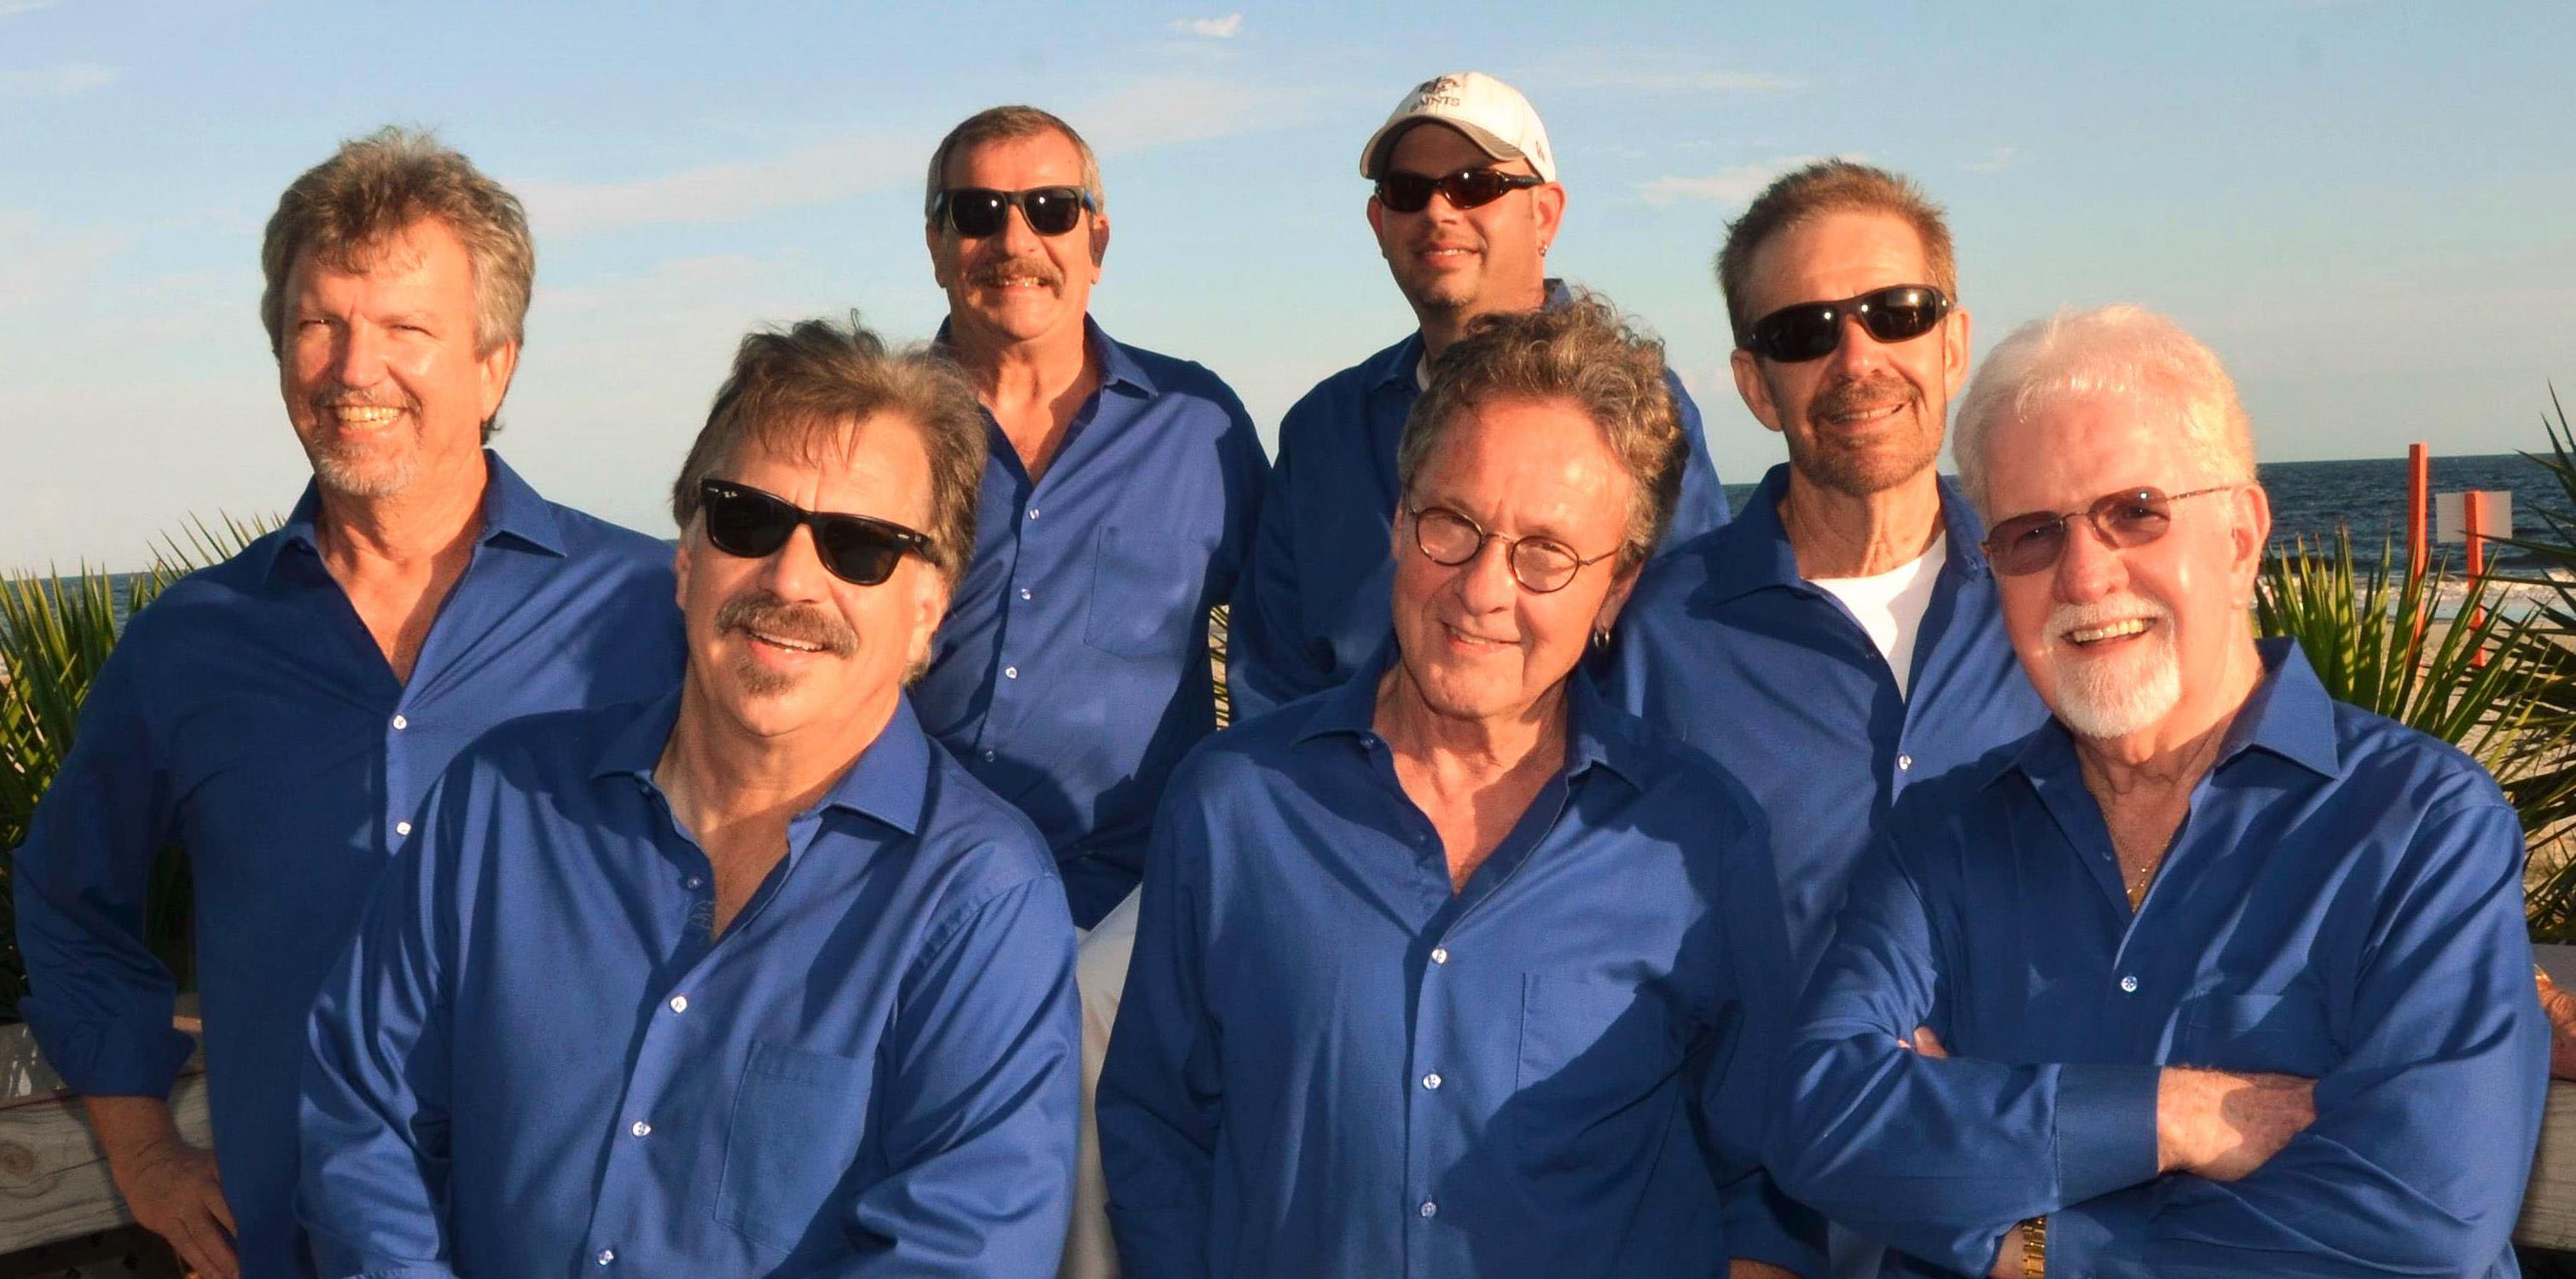 A band in blue shirts